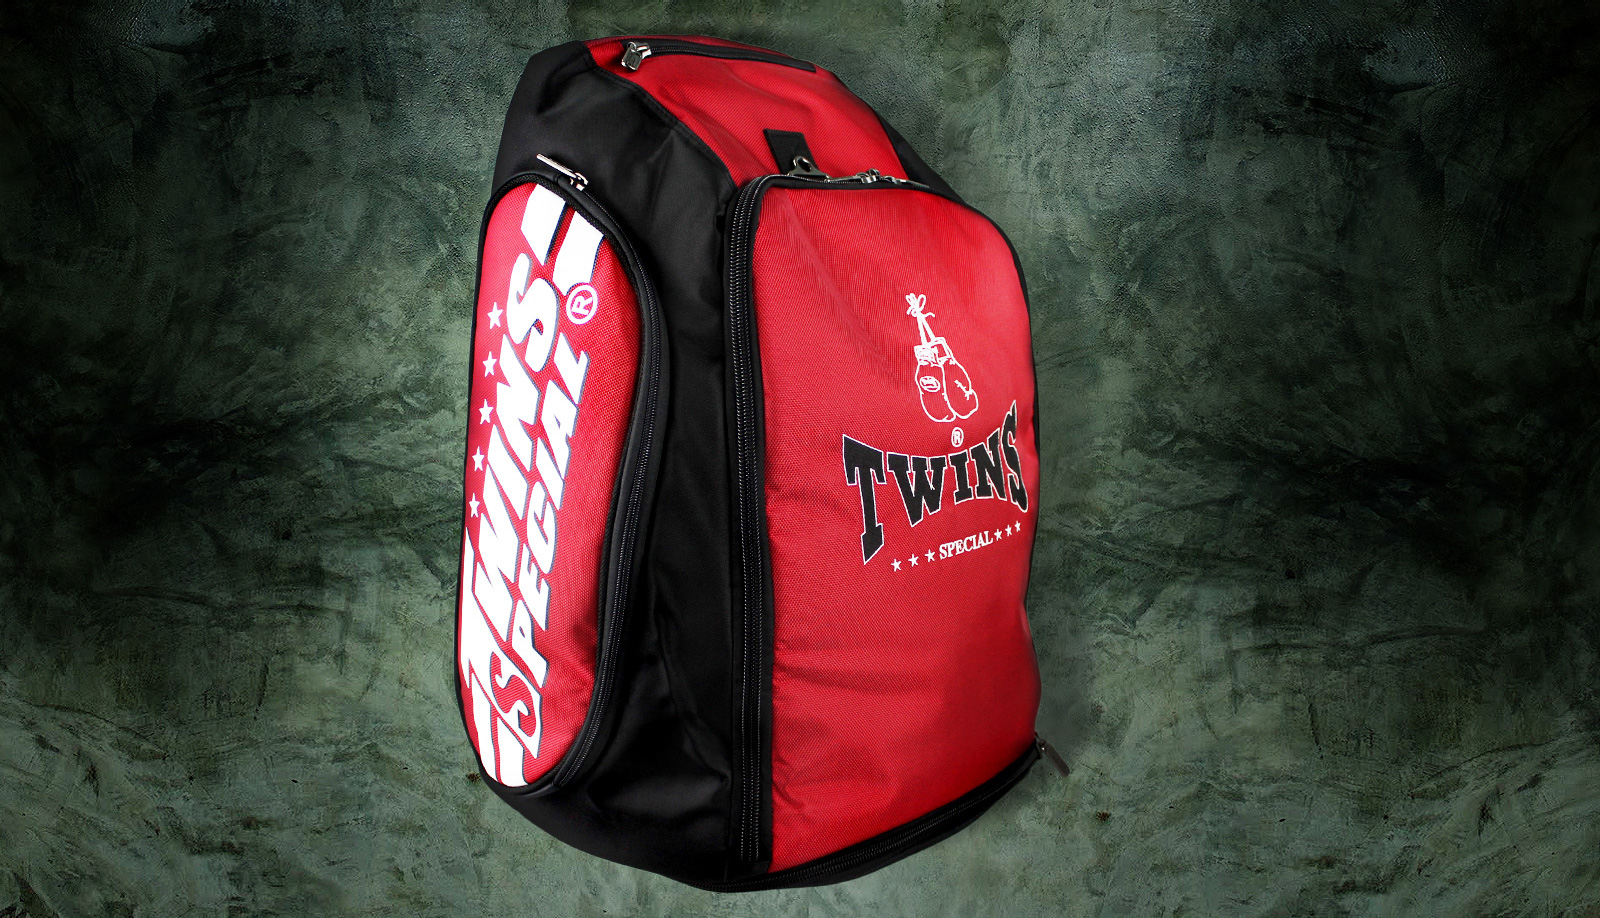 TWINS SPECIAL BAG5 BACKPACKER TRAINING GYM MUAY THAI BOXING MMA